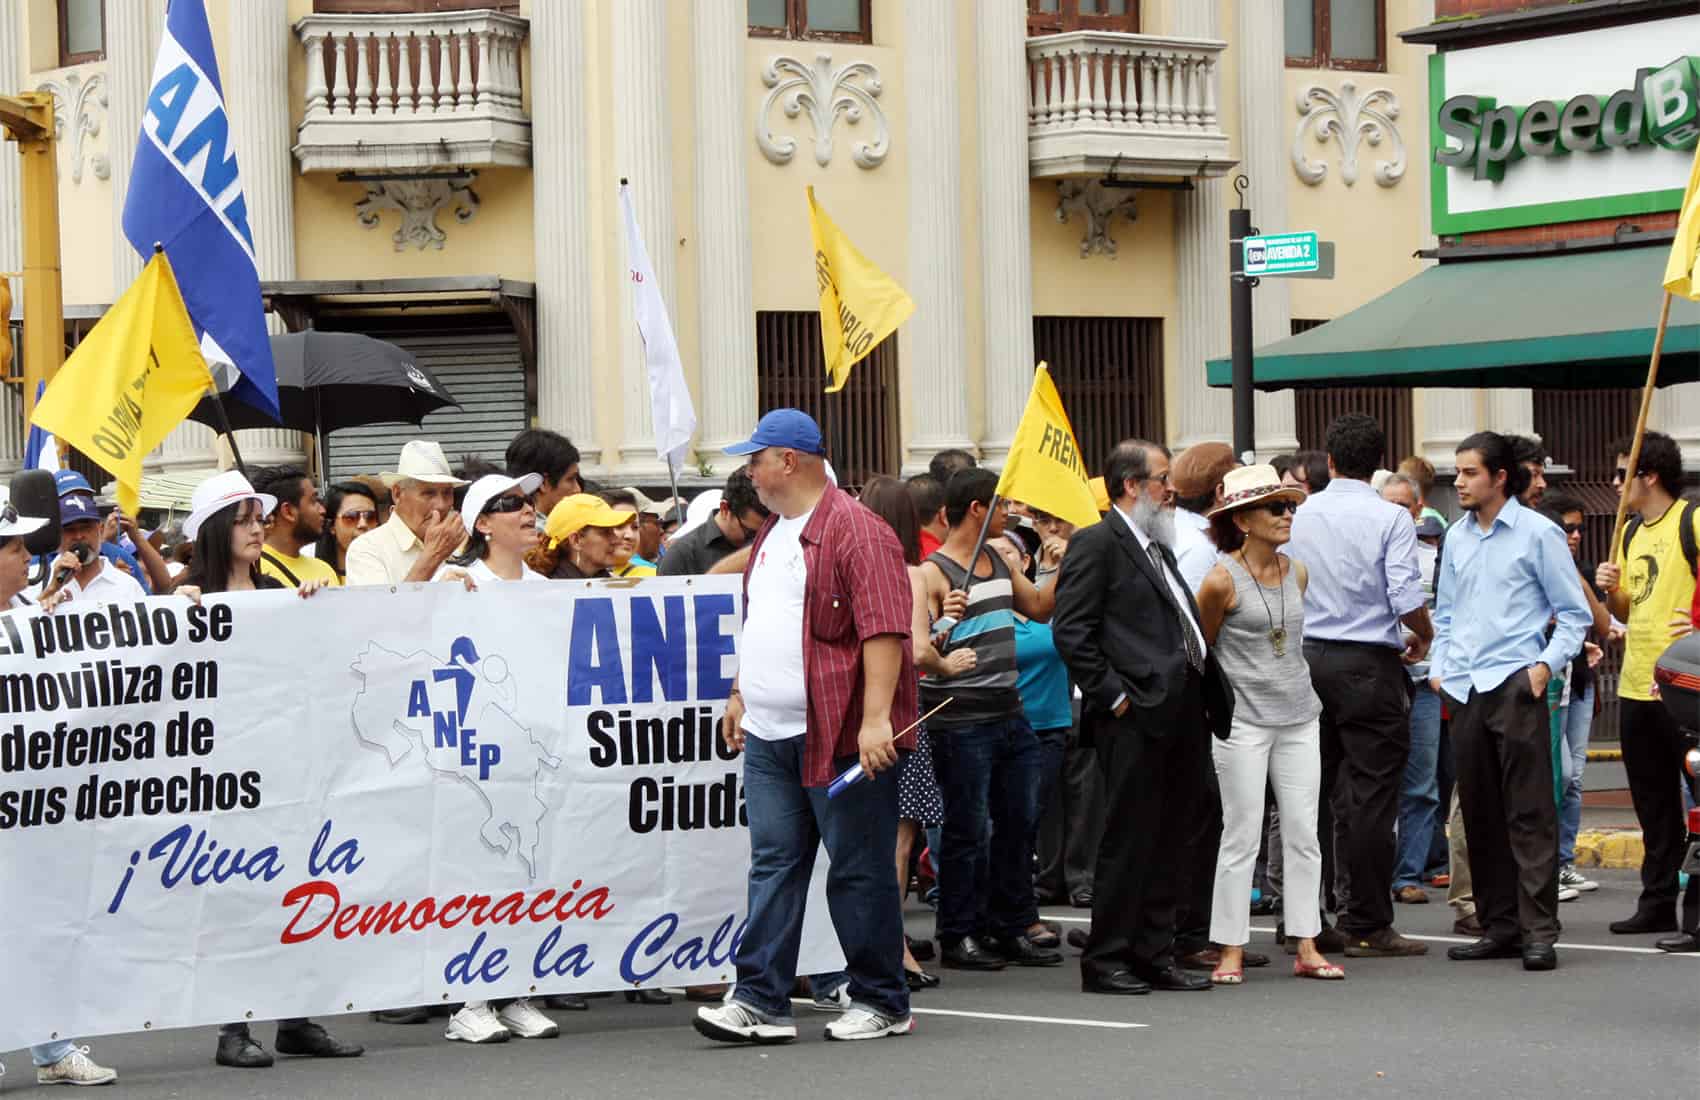 ANEP public demonstration Oct. 20, 2014